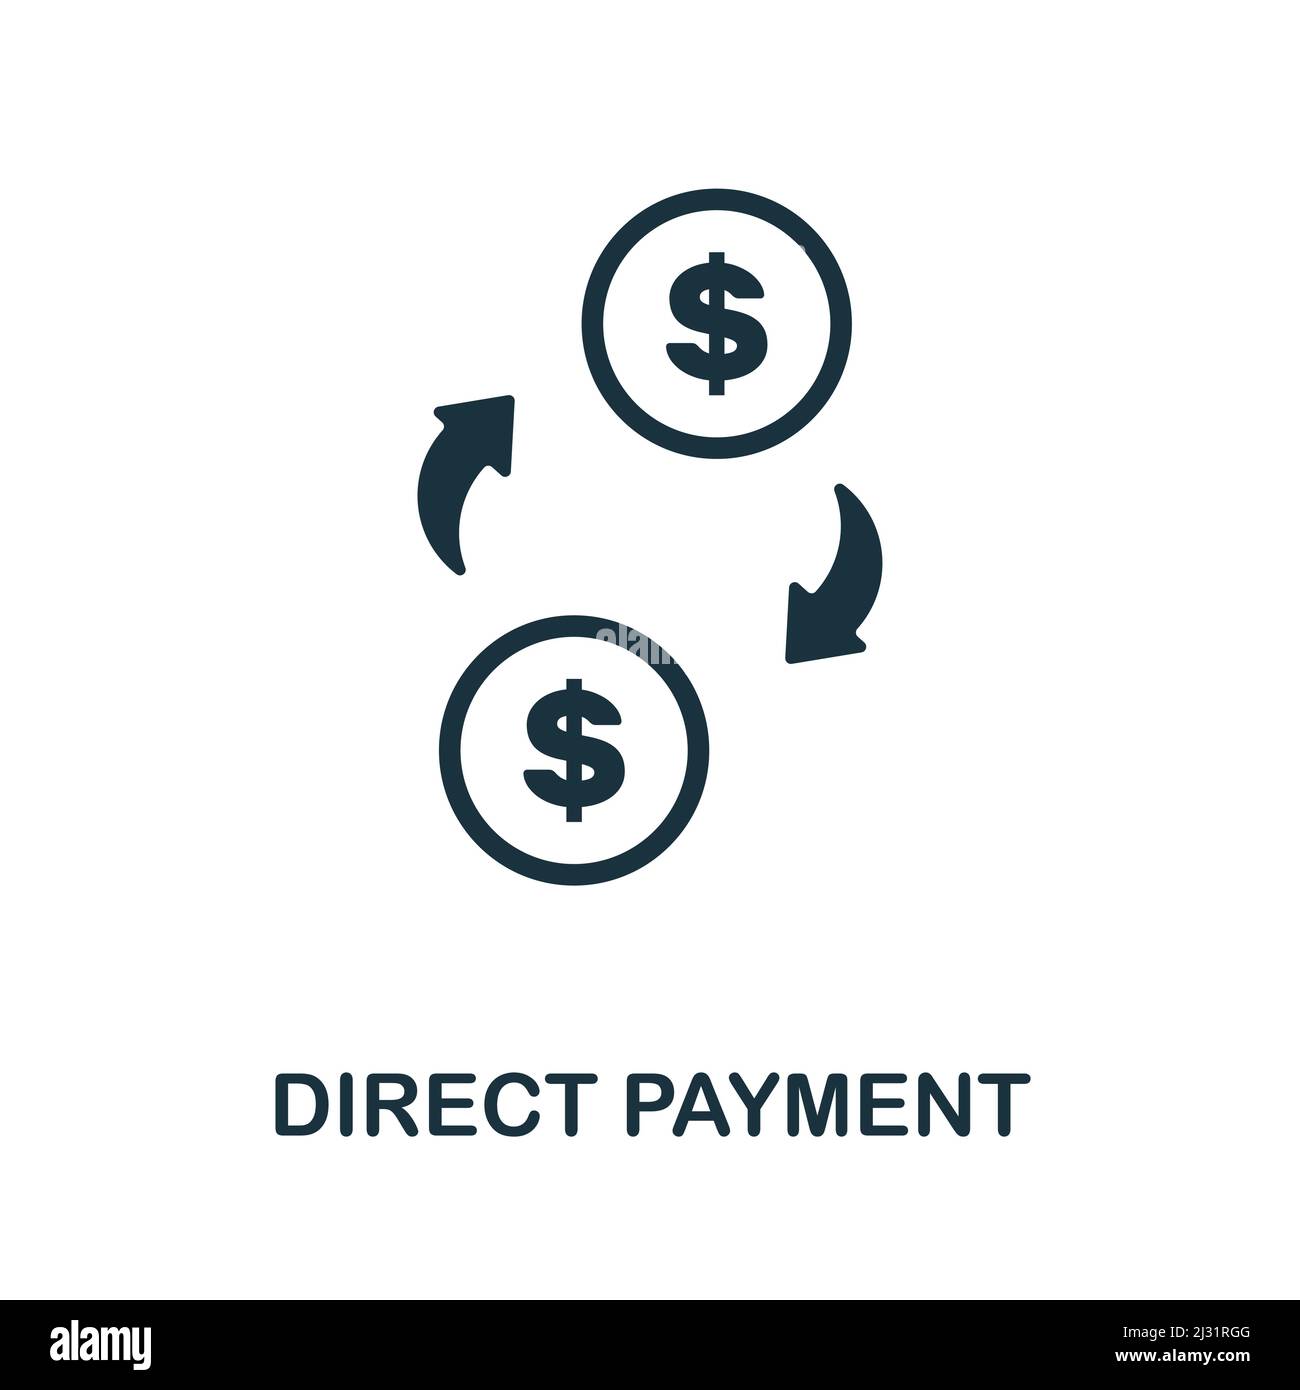 Direct Payment icon. Monochrome simple Direct Payment icon for templates, web design and infographics Stock Vector